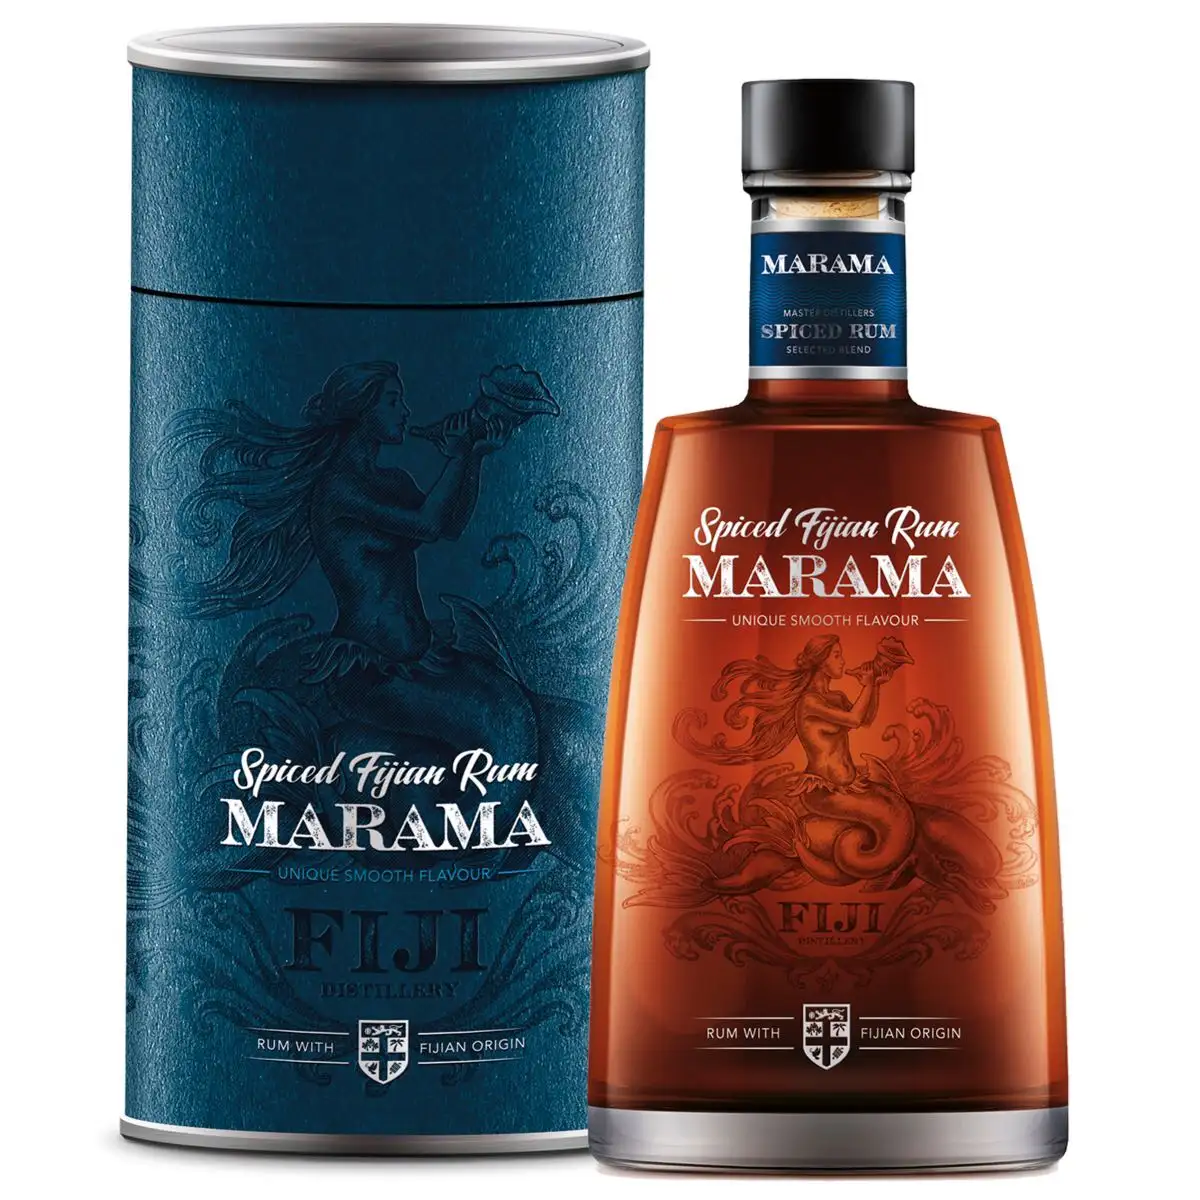 Image of the front of the bottle of the rum Spiced Fijian Rum